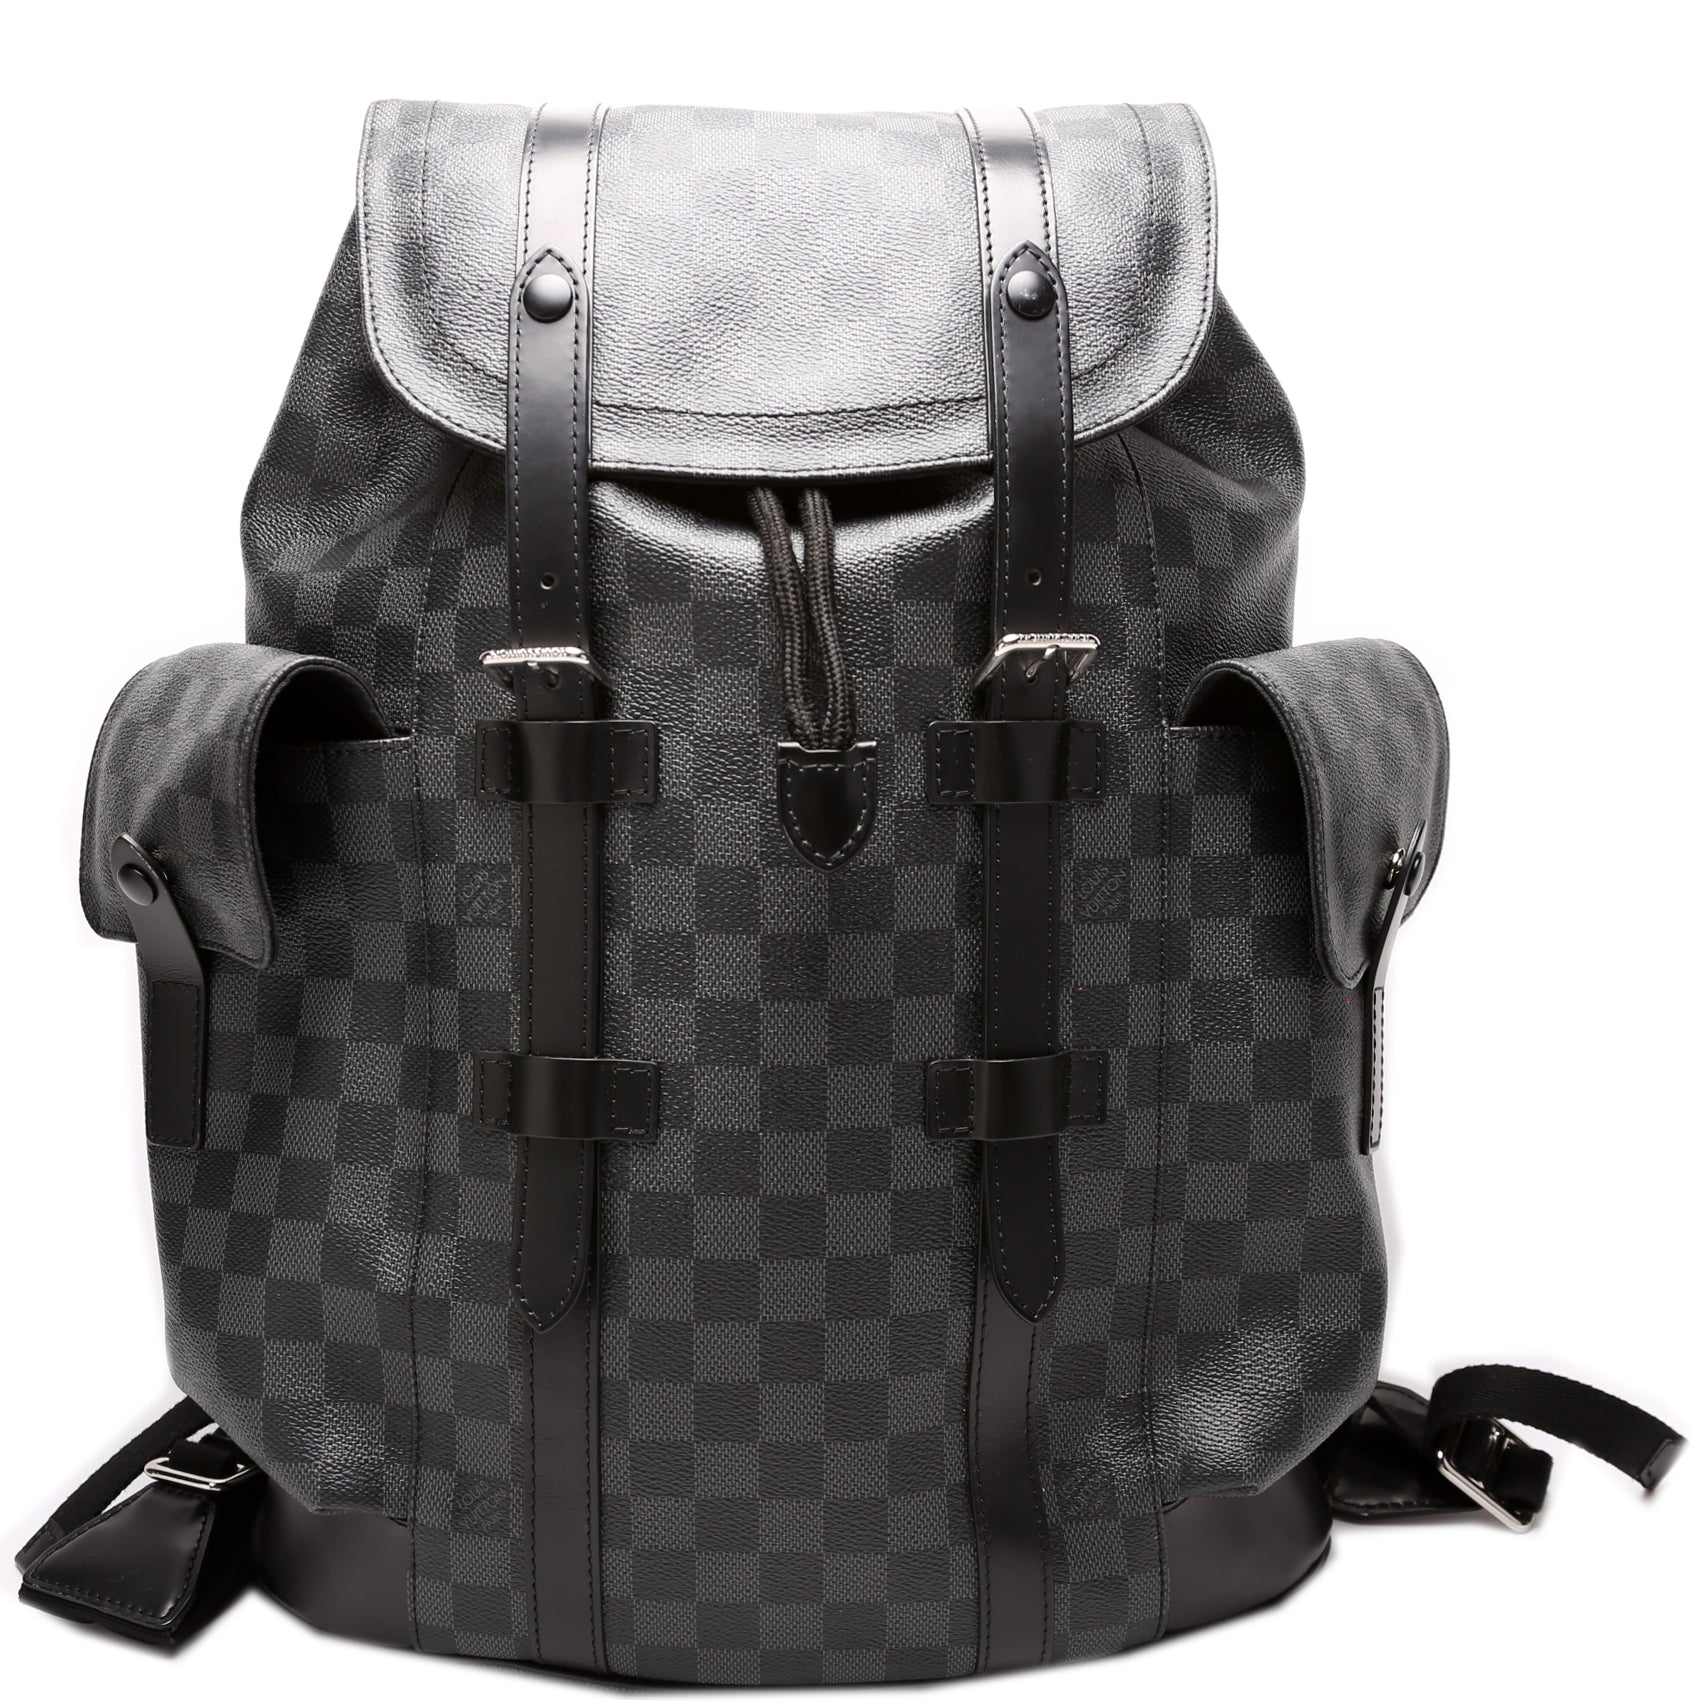 Christopher MM Backpack - Luxury Damier Graphite Canvas Grey